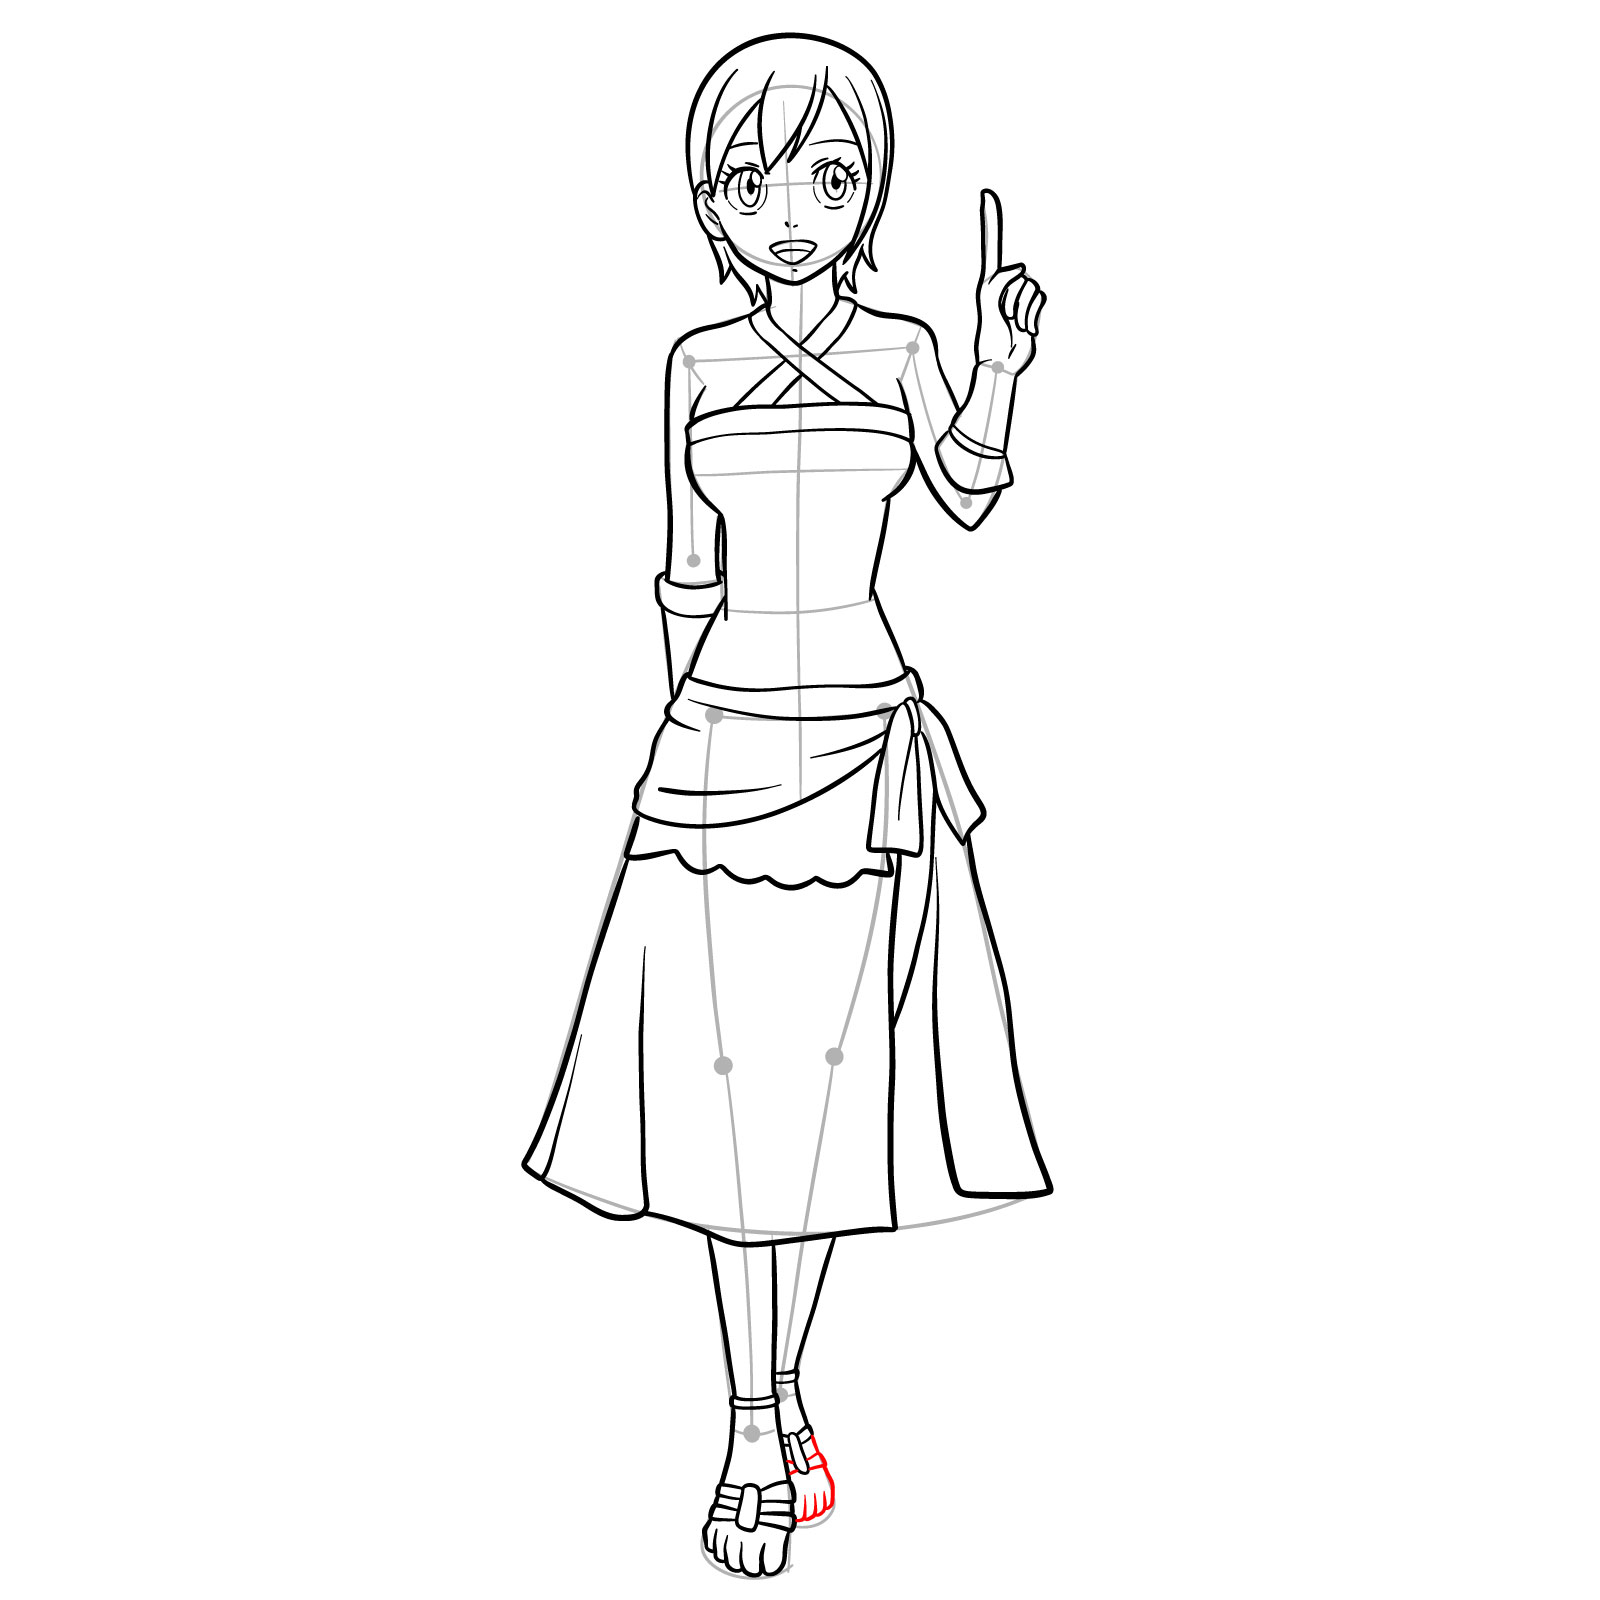 How to draw Lisanna Strauss from Fairy Tail - step 33